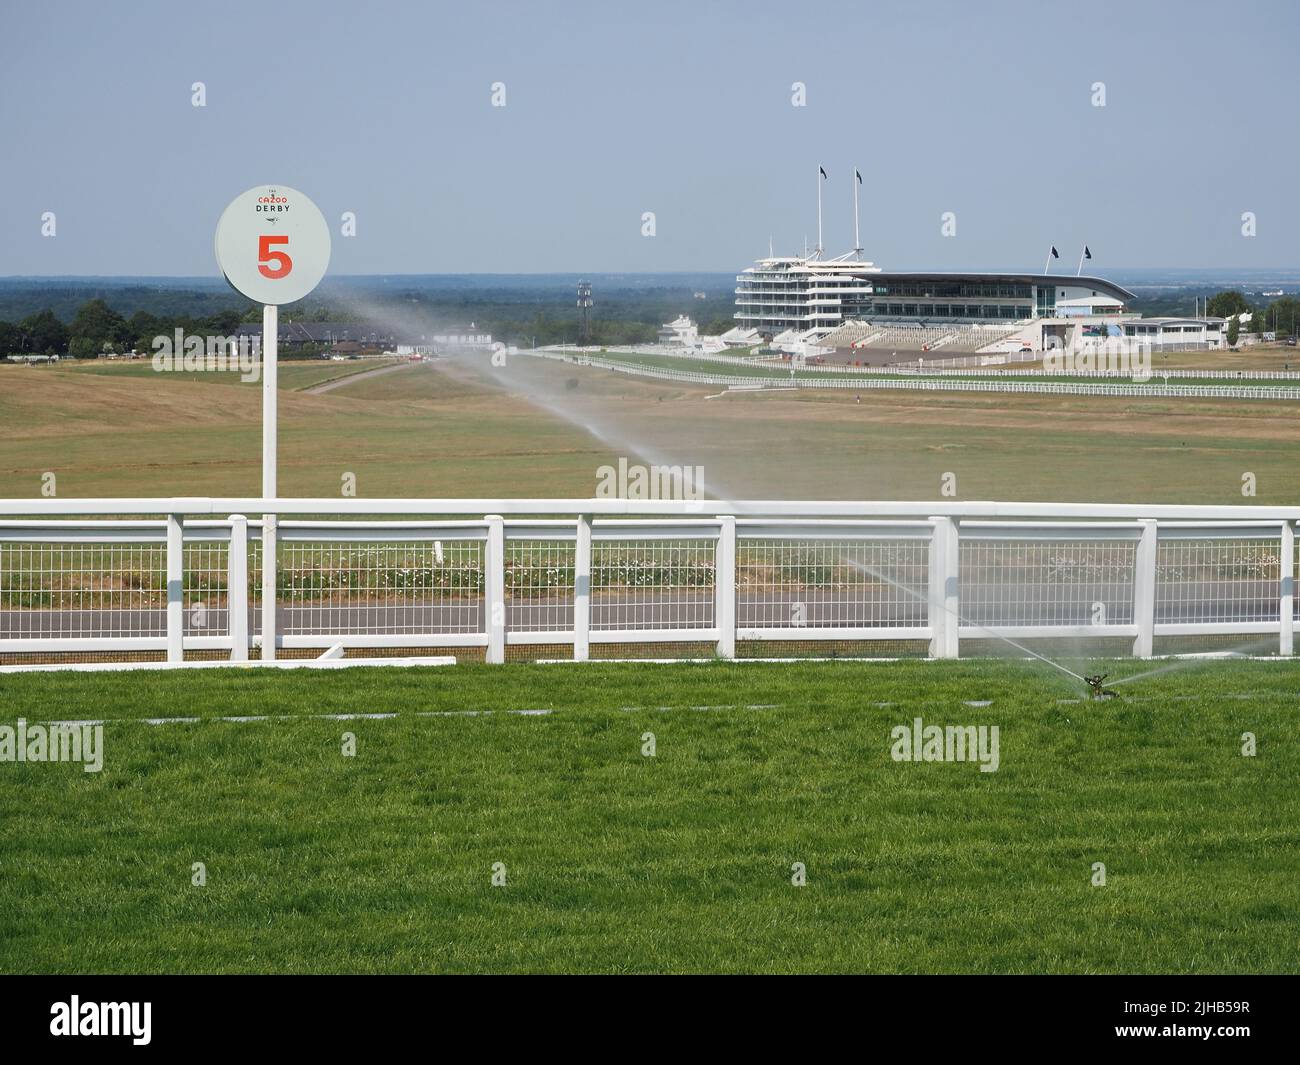 Epsom Downs, Surrey, England, UK. 17th July, 2022. During the exceptionally hot weather, the water sprinklers are working hard to keep the race course in top condition at Epsom Downs in Surrey. In contrast with the adjoining downs the course is looking lush and green. Credit: Julia Gavin/Alamy Live News Stock Photo